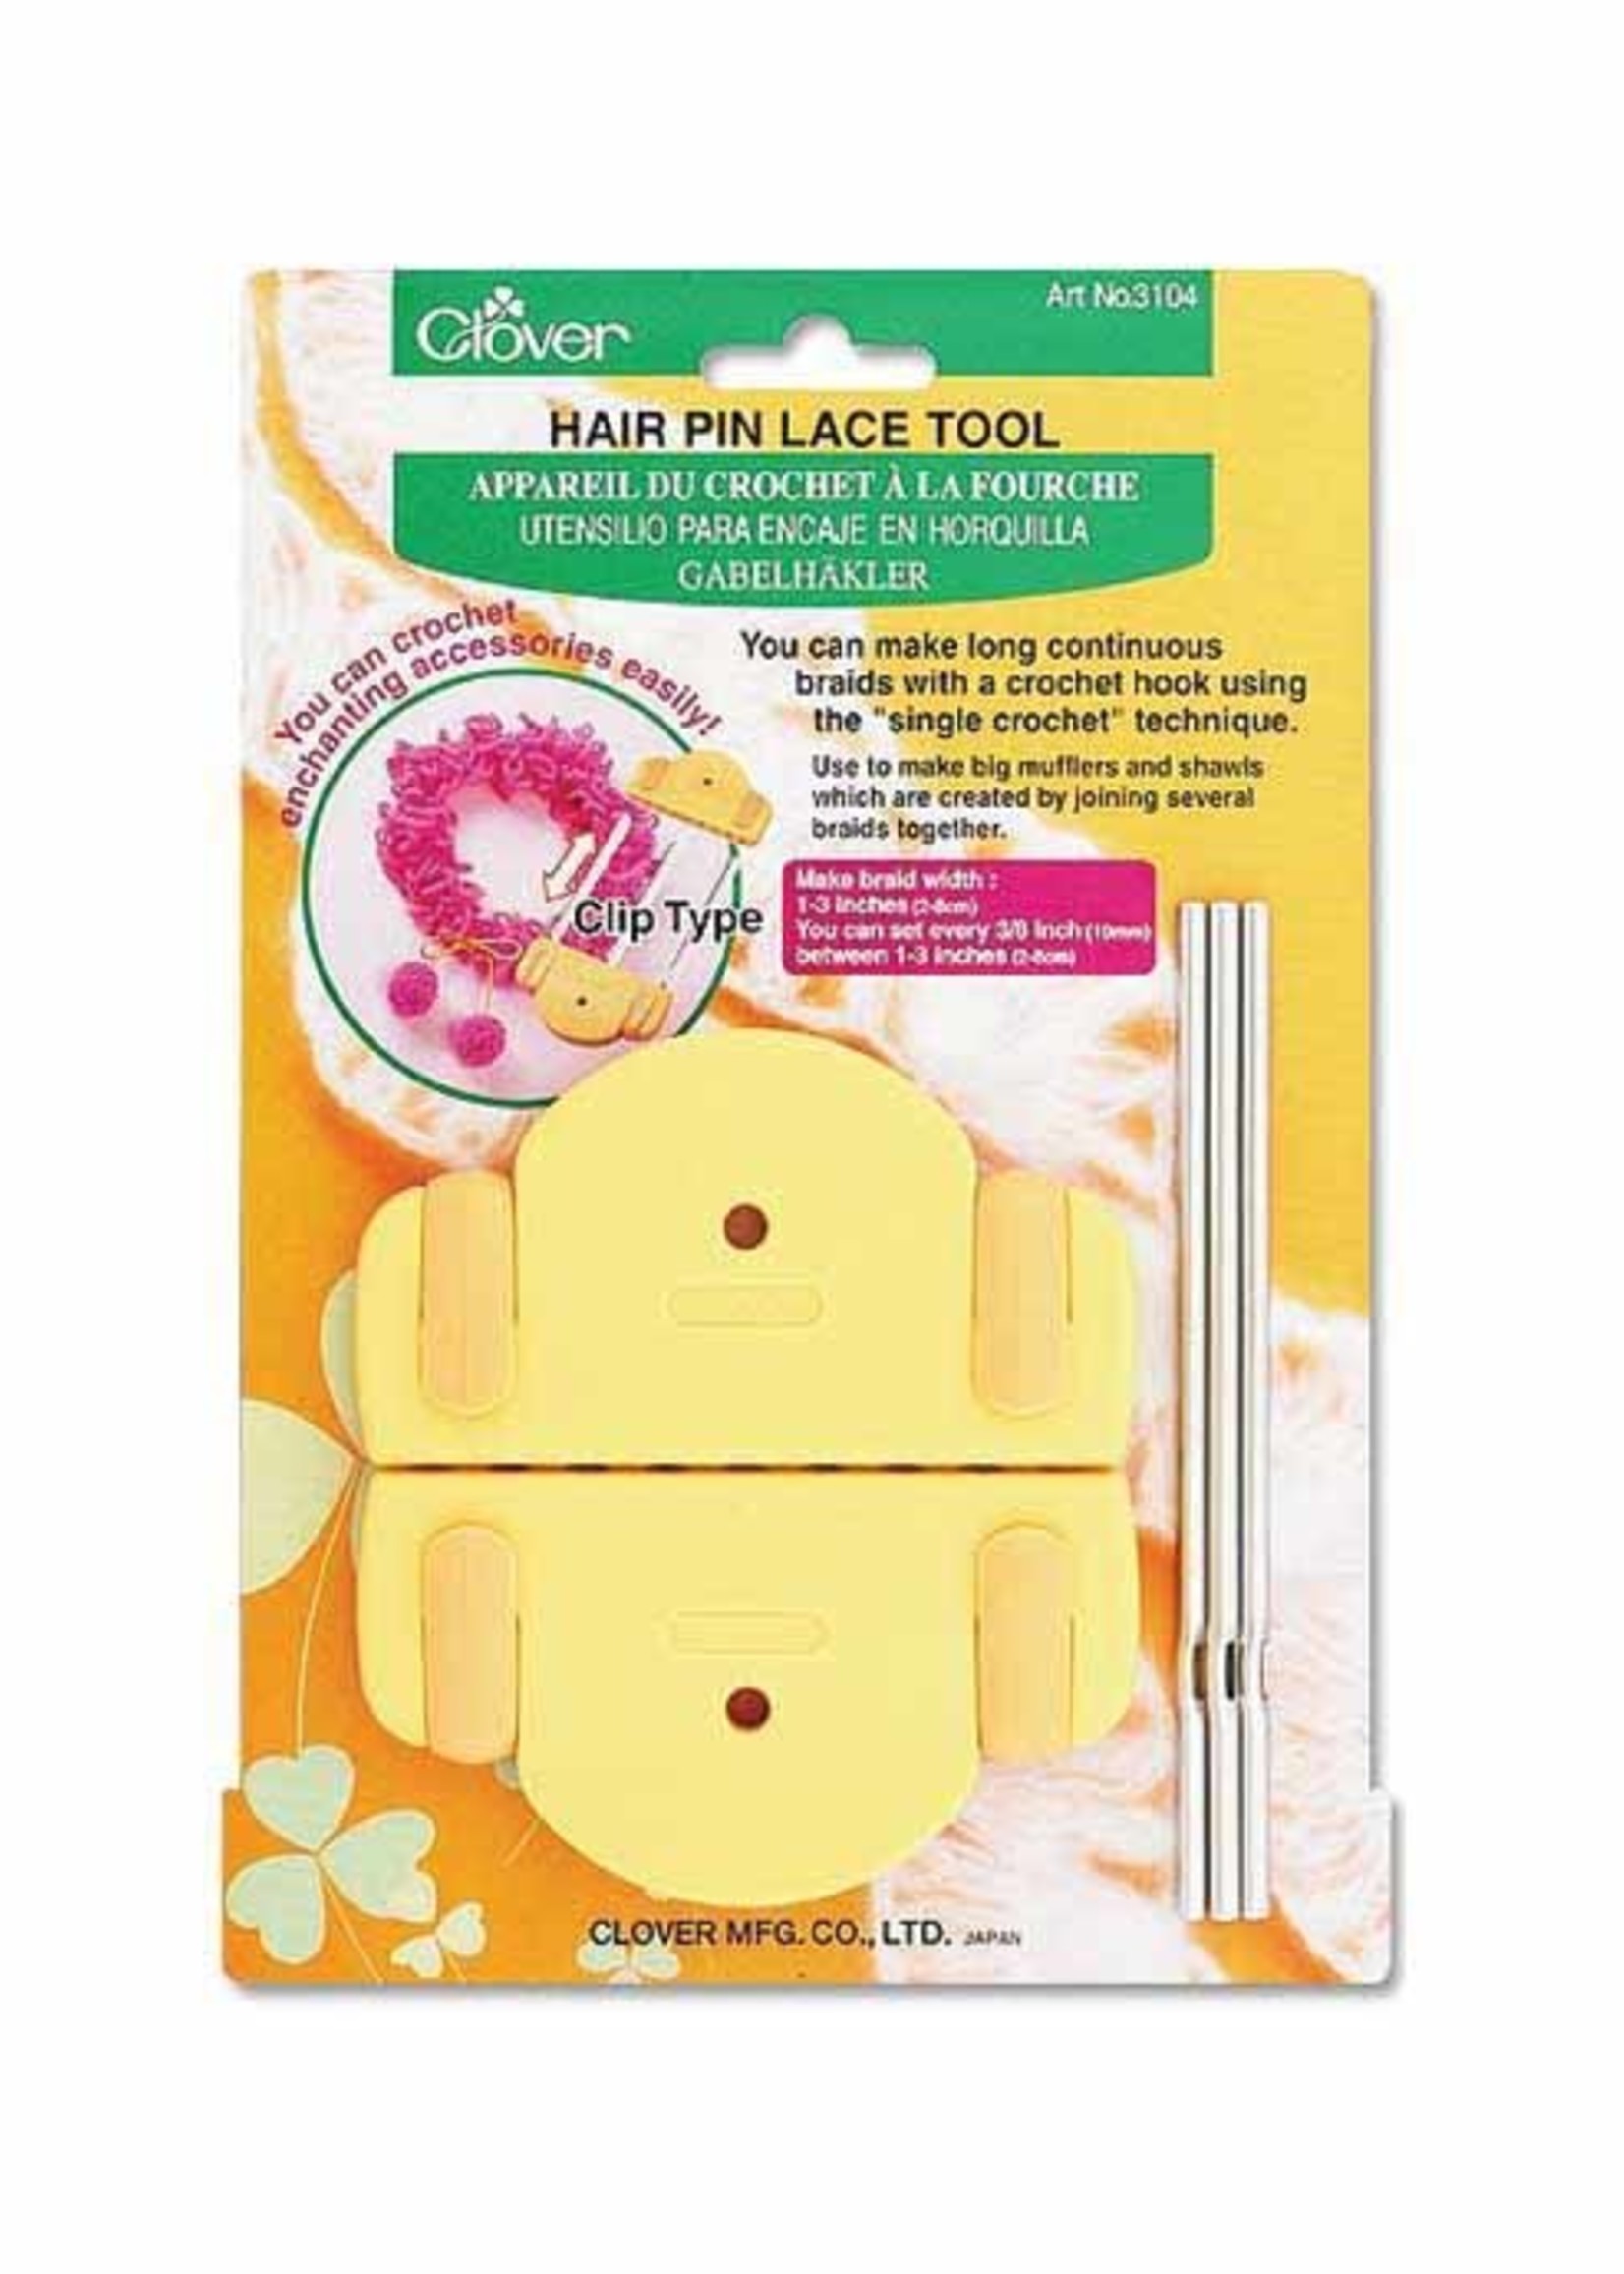 Clover Clover Hair Pin Lace Tool